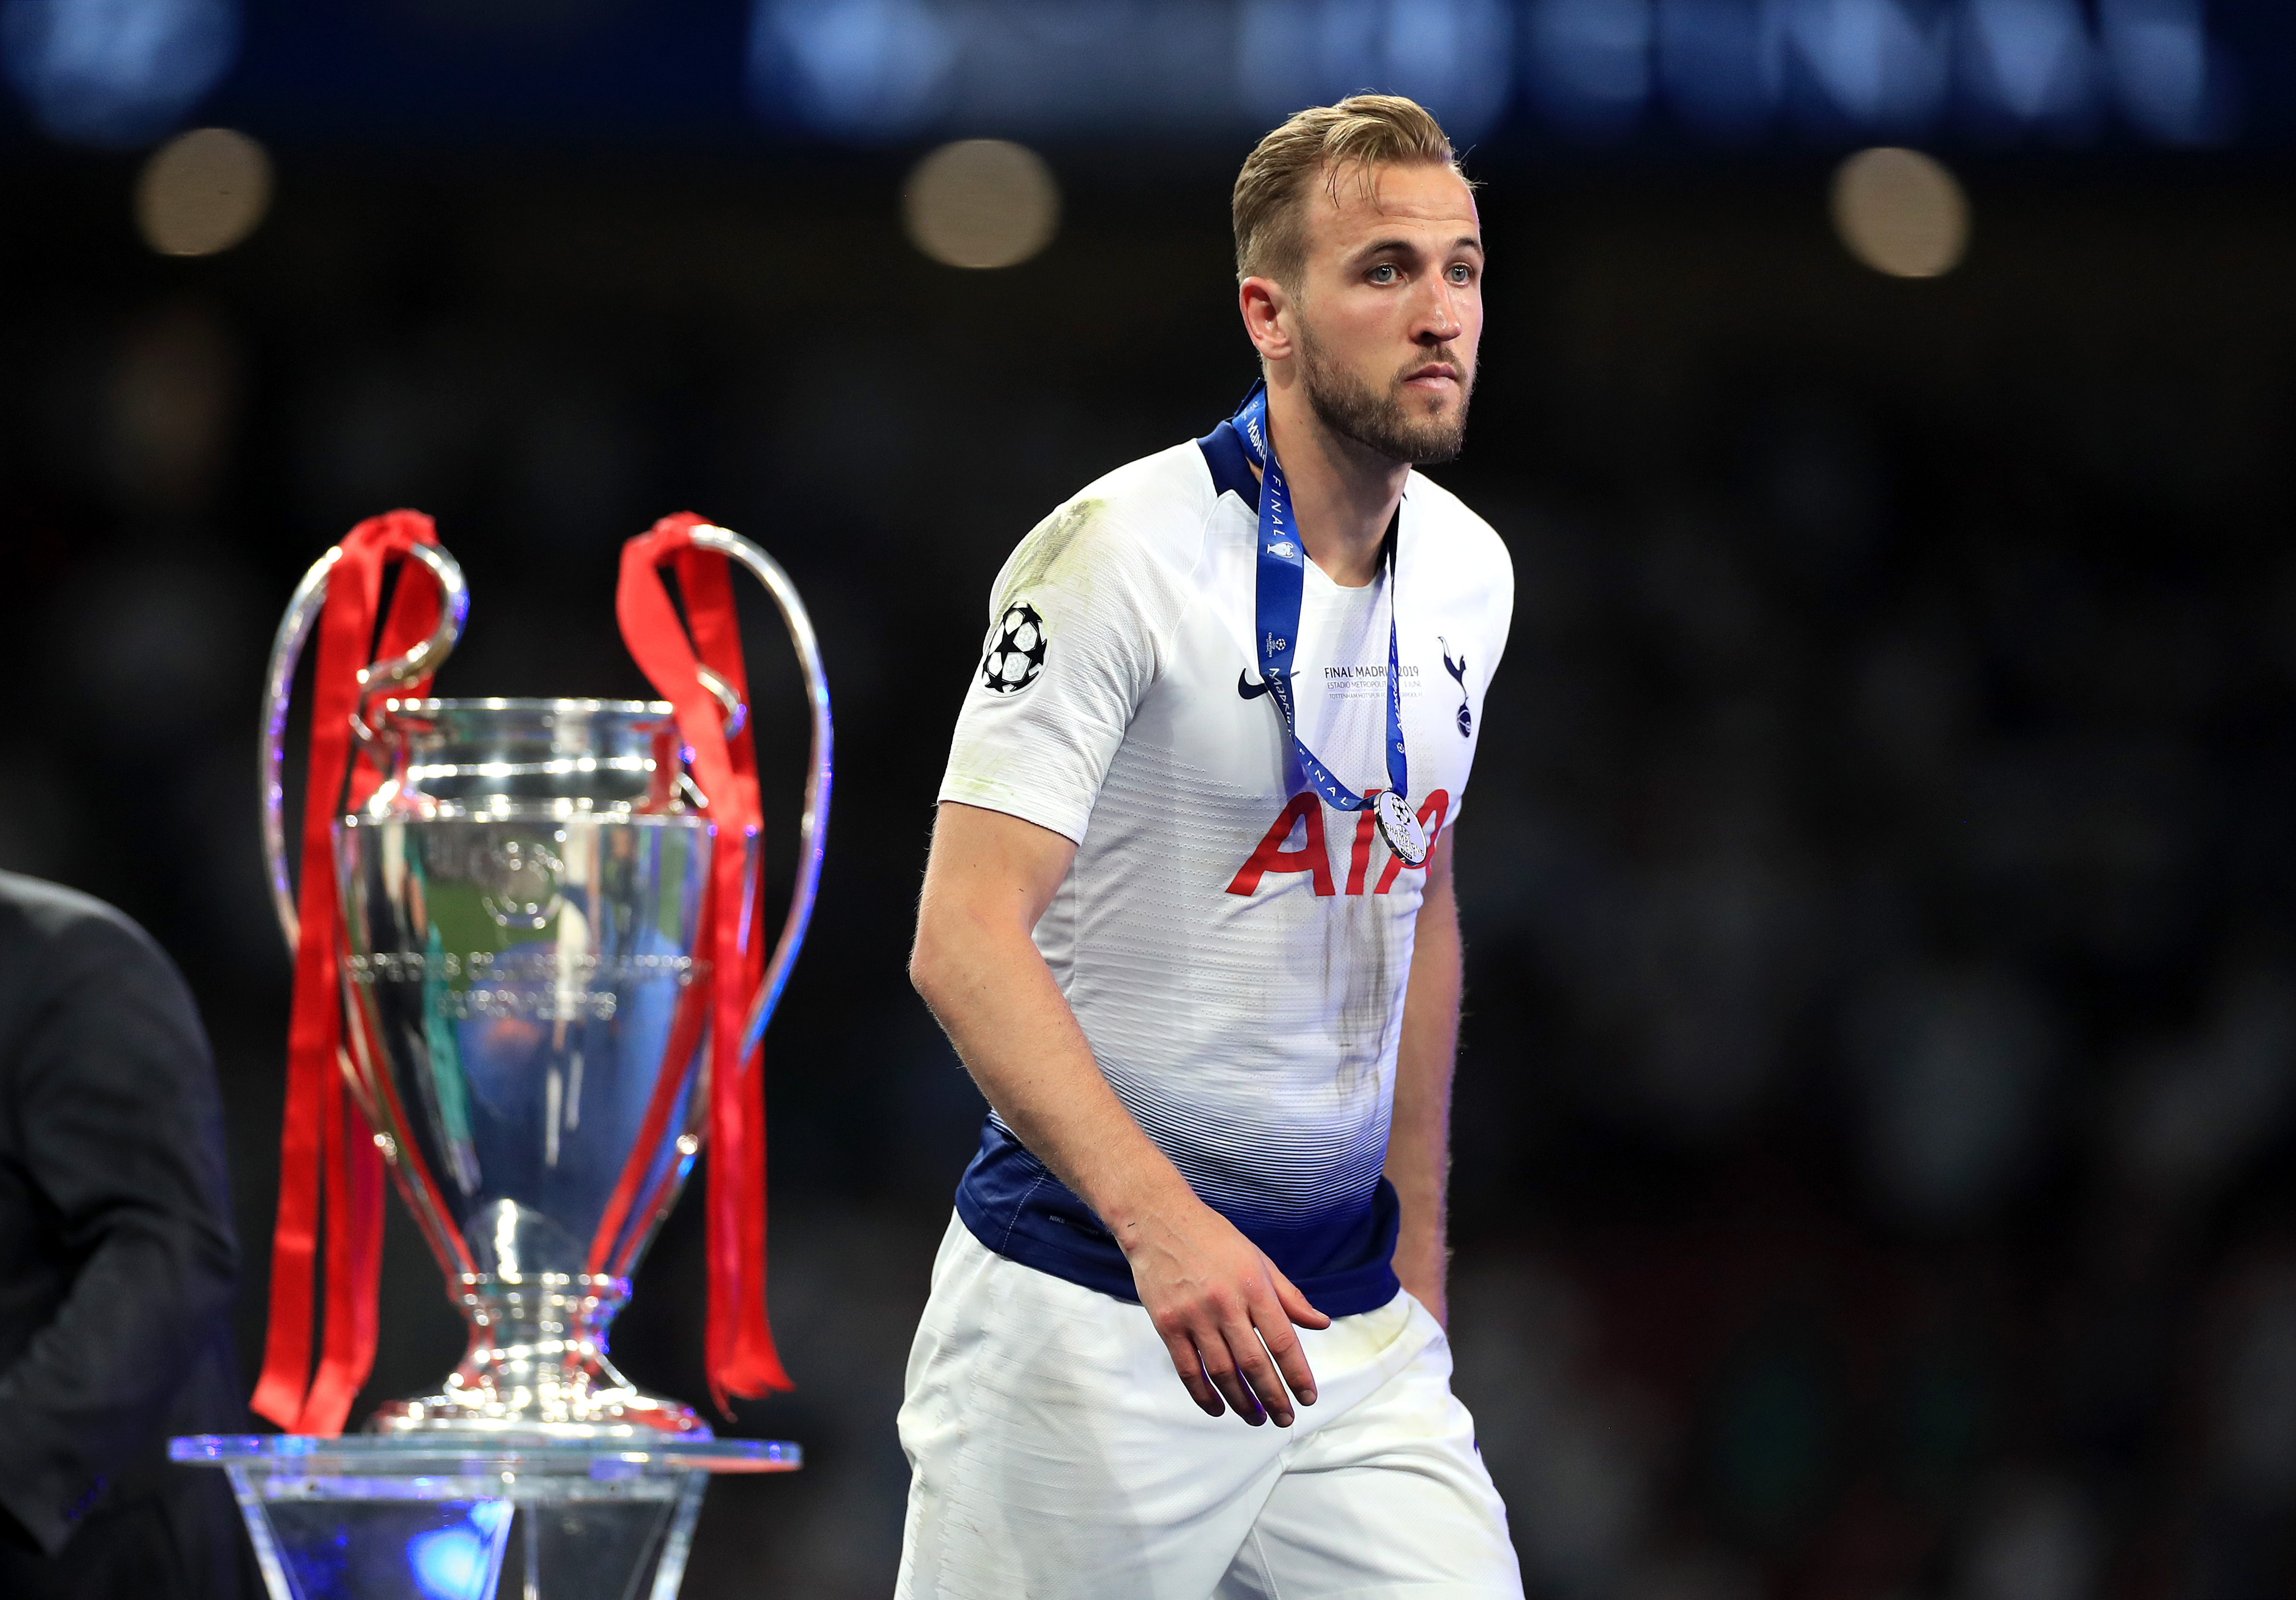 Kane lost the Champions League final in 2019 with Tottenham